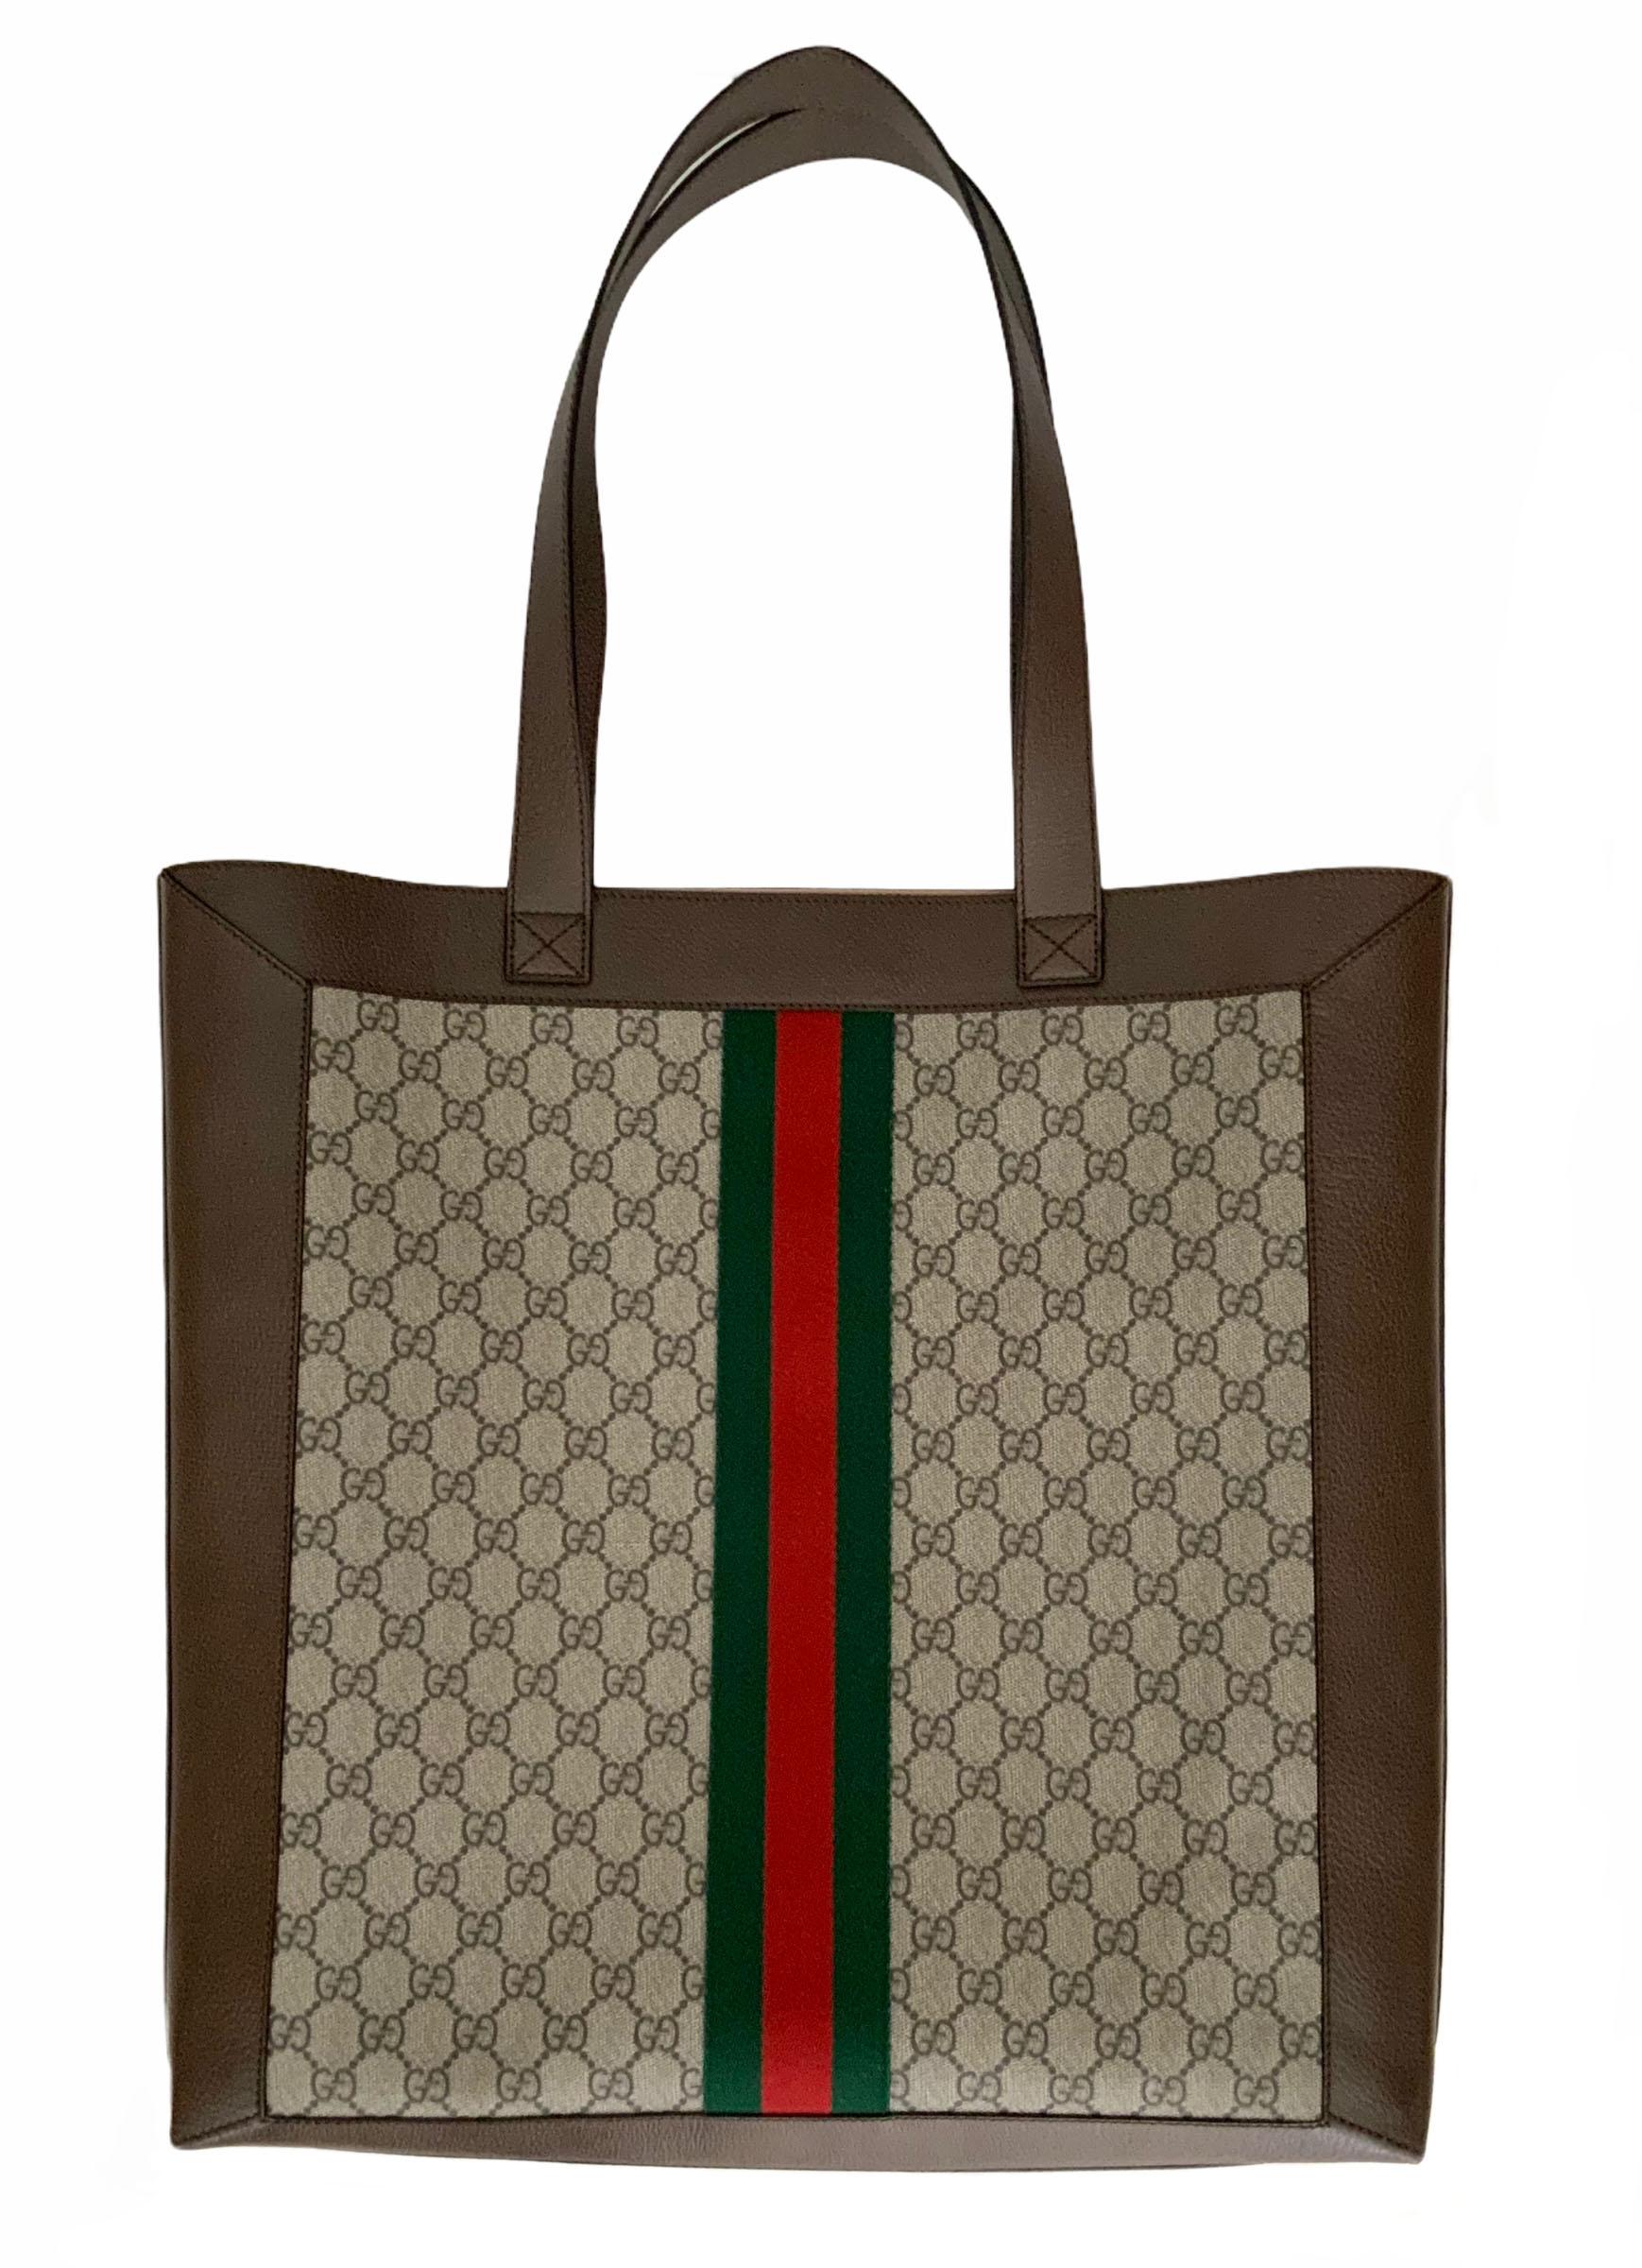 This pre-owned but new large tote from Gucci is crafted in the beige/ebony soft GG Supreme coated microfibre fabric with brown leather trim, the green and red Webcoated and the double G.
The interior is crafted in a microfibre lining with a